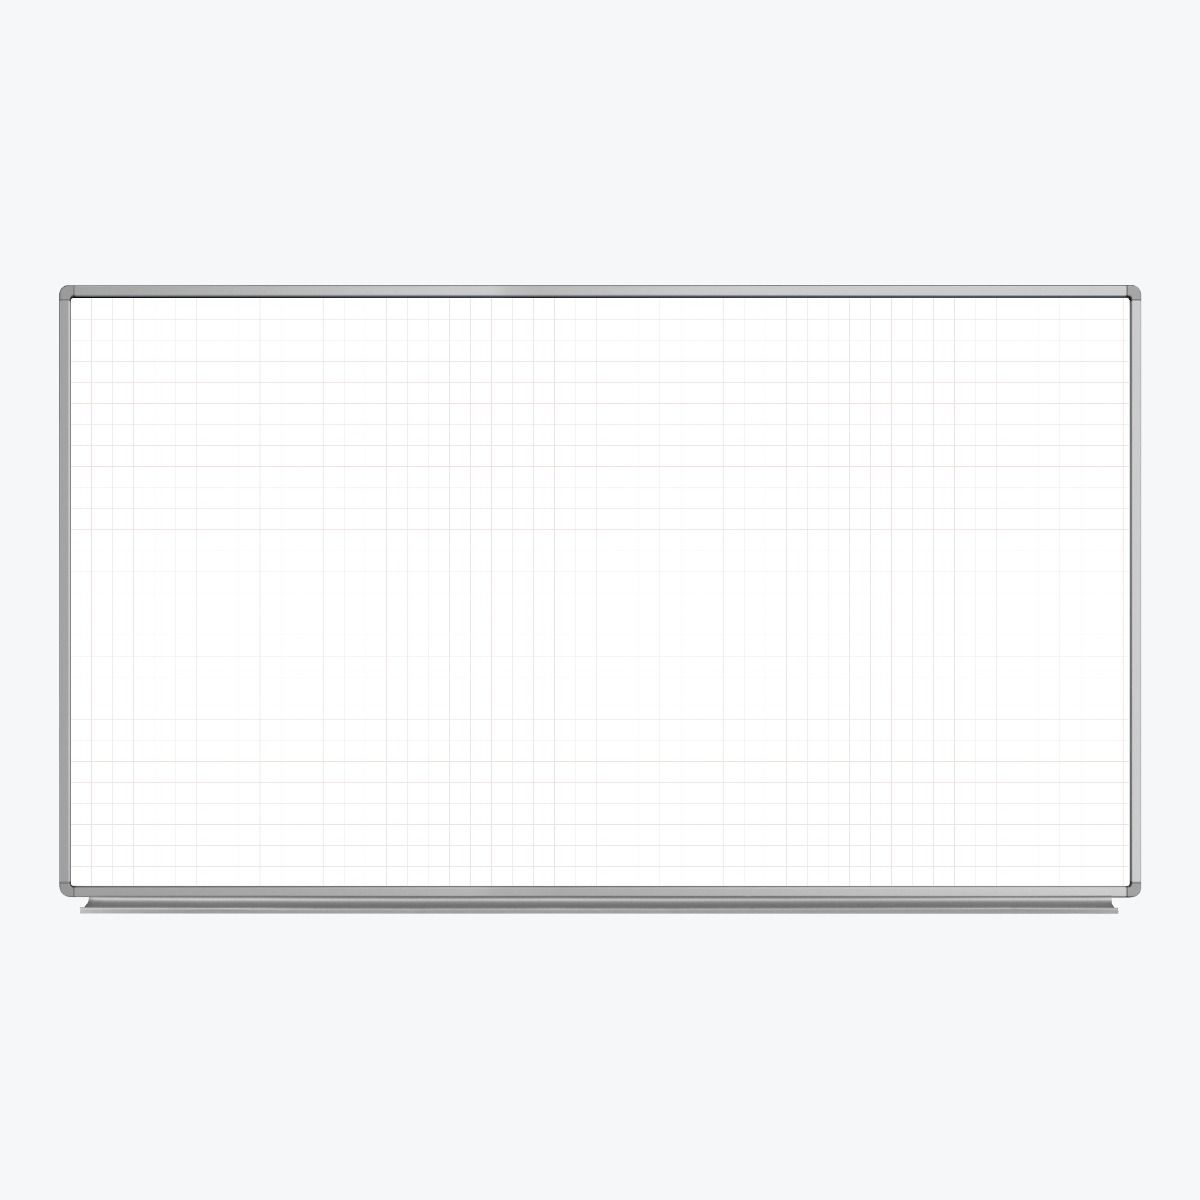 Wb7240lb 72 X 40 In. Wall Mounted Magnetic Ghost Grid Whiteboard